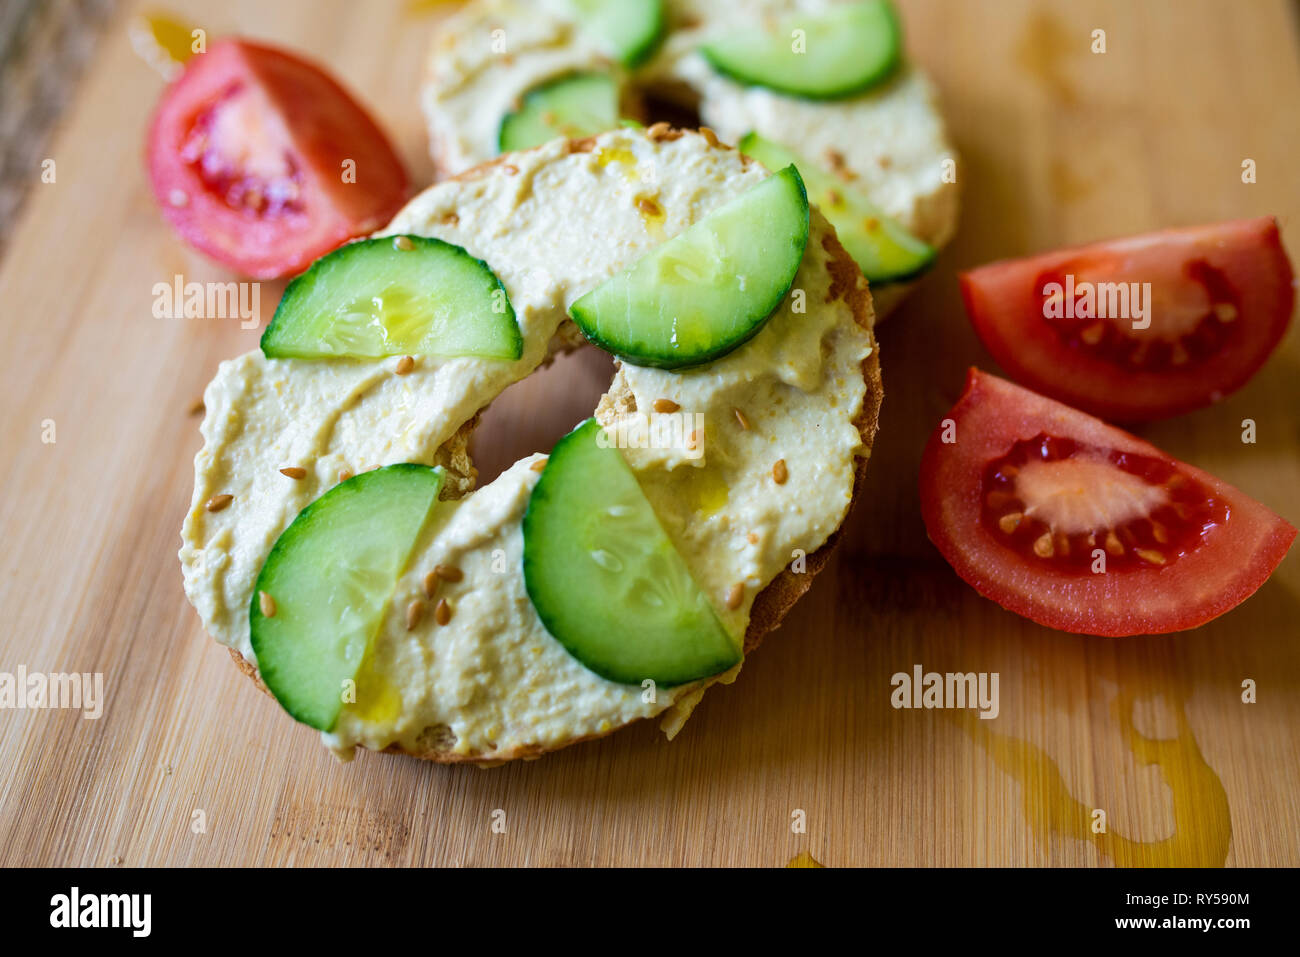 a bagel with hummus, humous, hommous and cucumber, vegan, vegetarian, healthy food breakfast or lunch on a wooden board Stock Photo